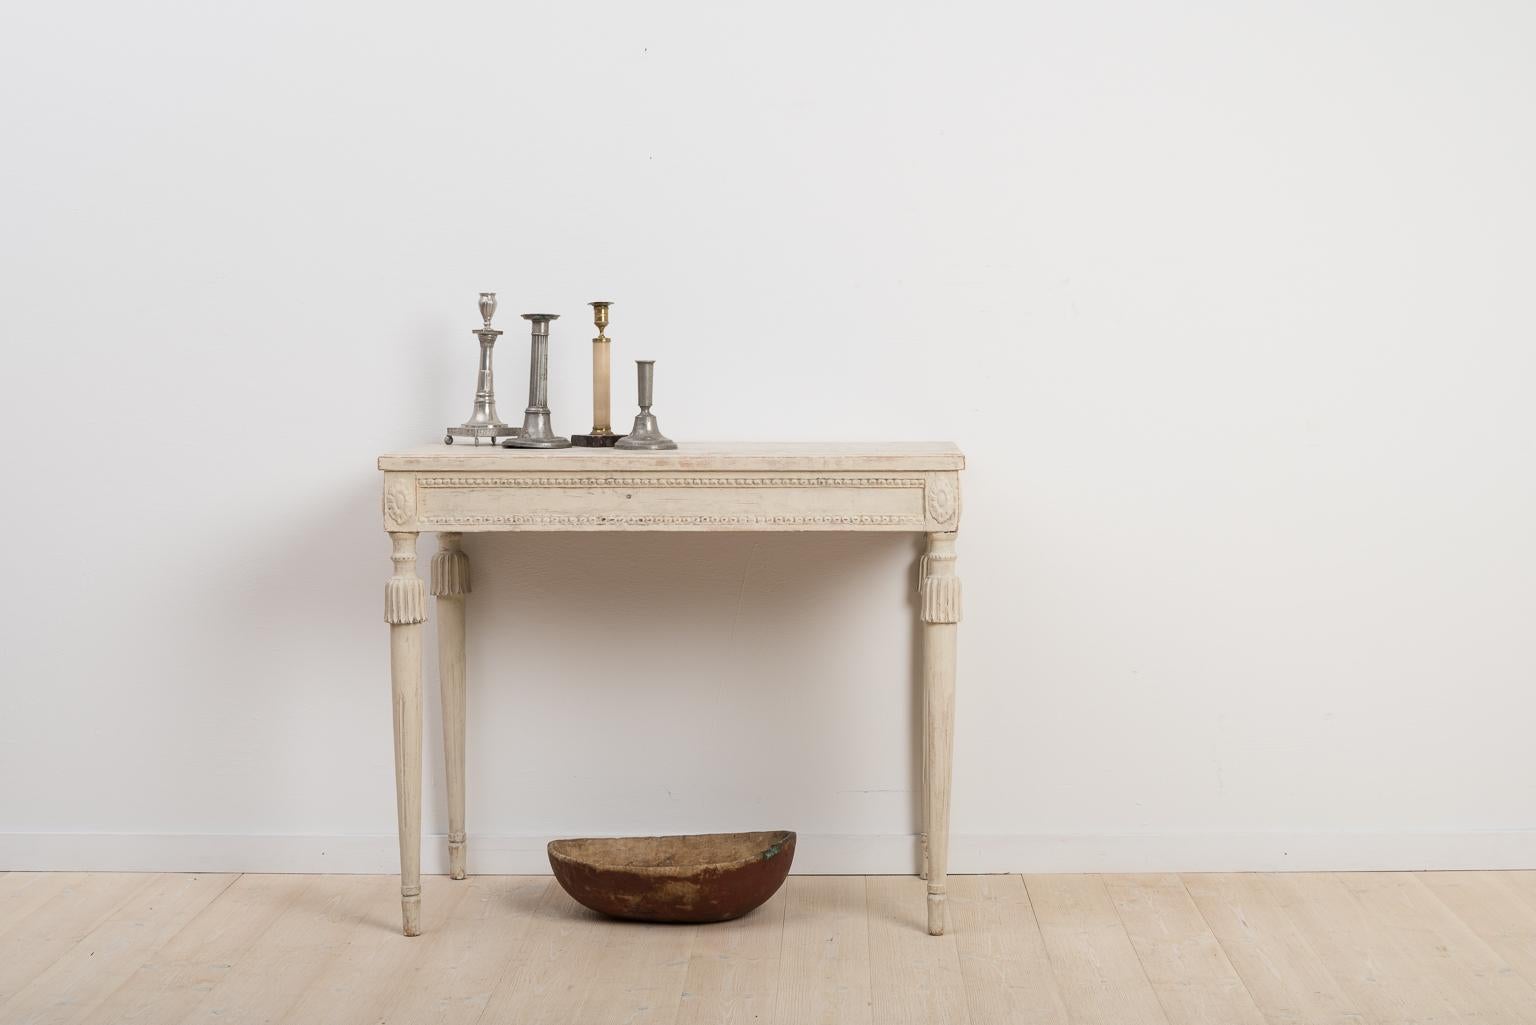 Swedish Gustavian console table from northern Sweden, Hälsingland manufactured circa late 1700s. With carved wooden decorations along the rim. The table’s back long side is not decorated as it was meant to be standing against a wall.